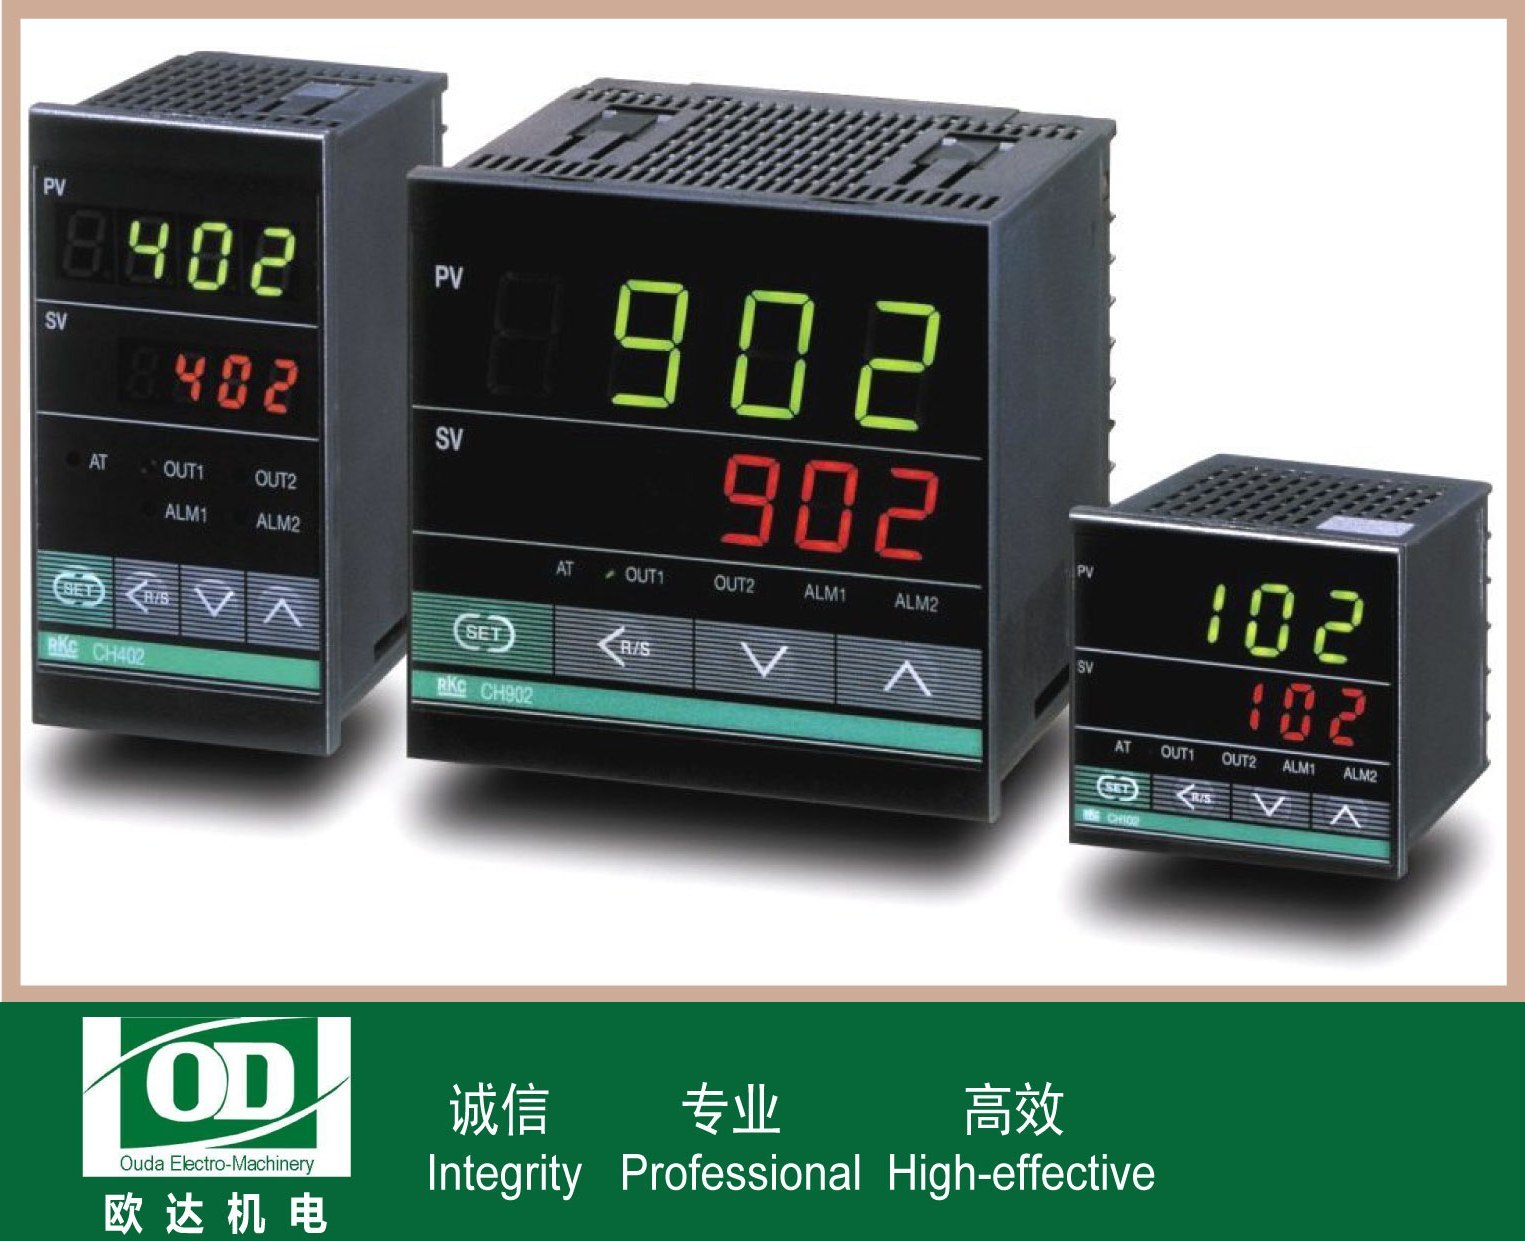 RKC temperature control meters and sensors from Nippon Chemielower